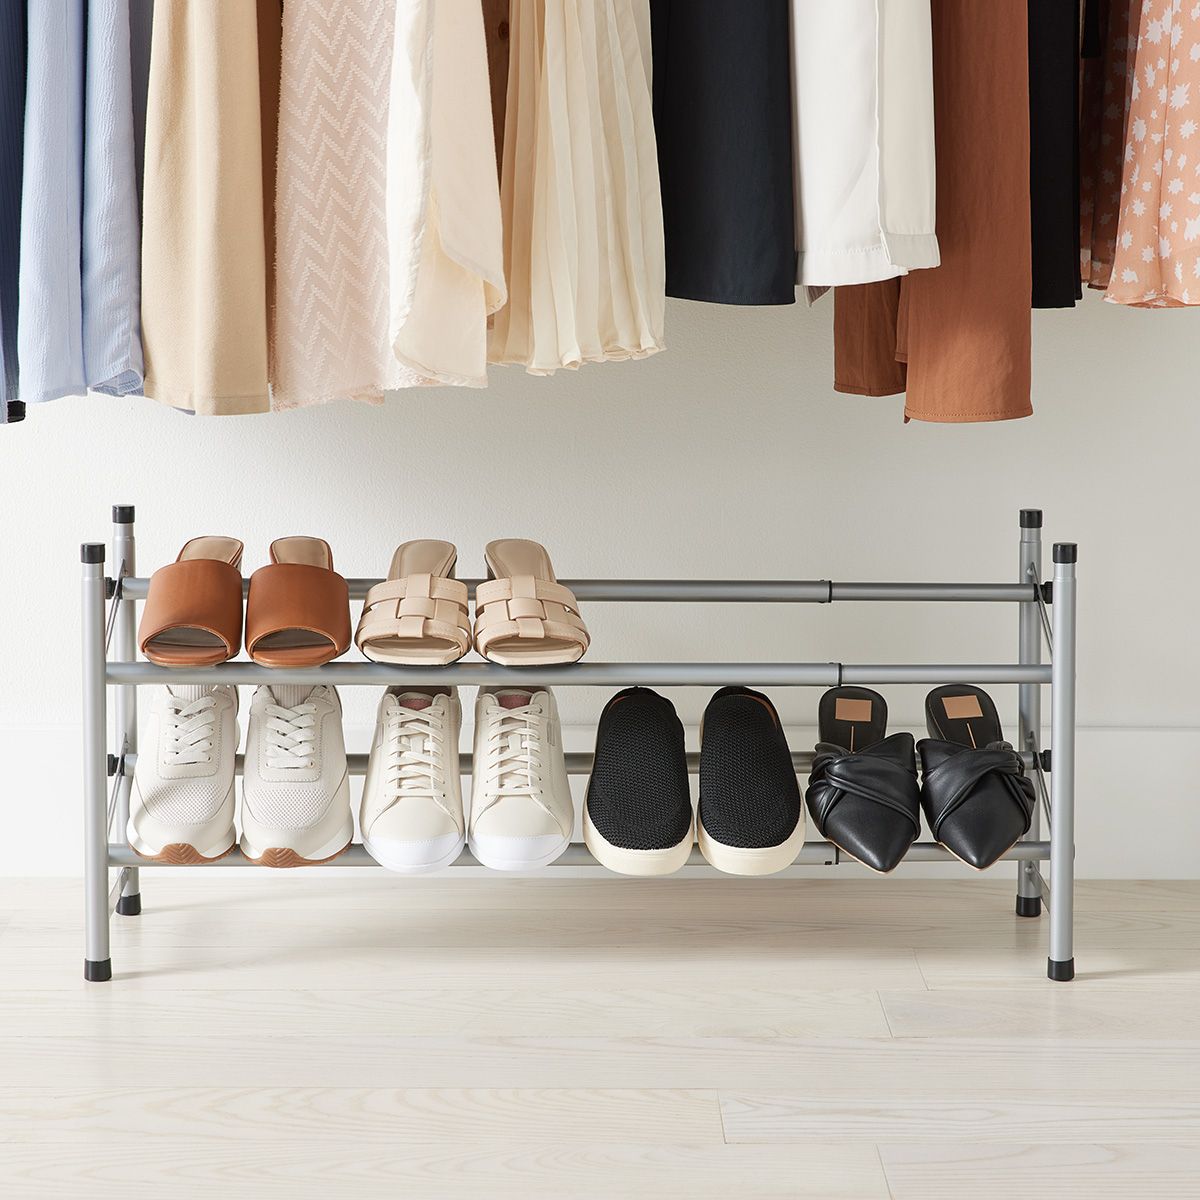 Platinum 2 Tier Adjustable Shoe Rack | The Container Store With Regard To 2 Tier Adjustable Wardrobes (Photo 5 of 15)